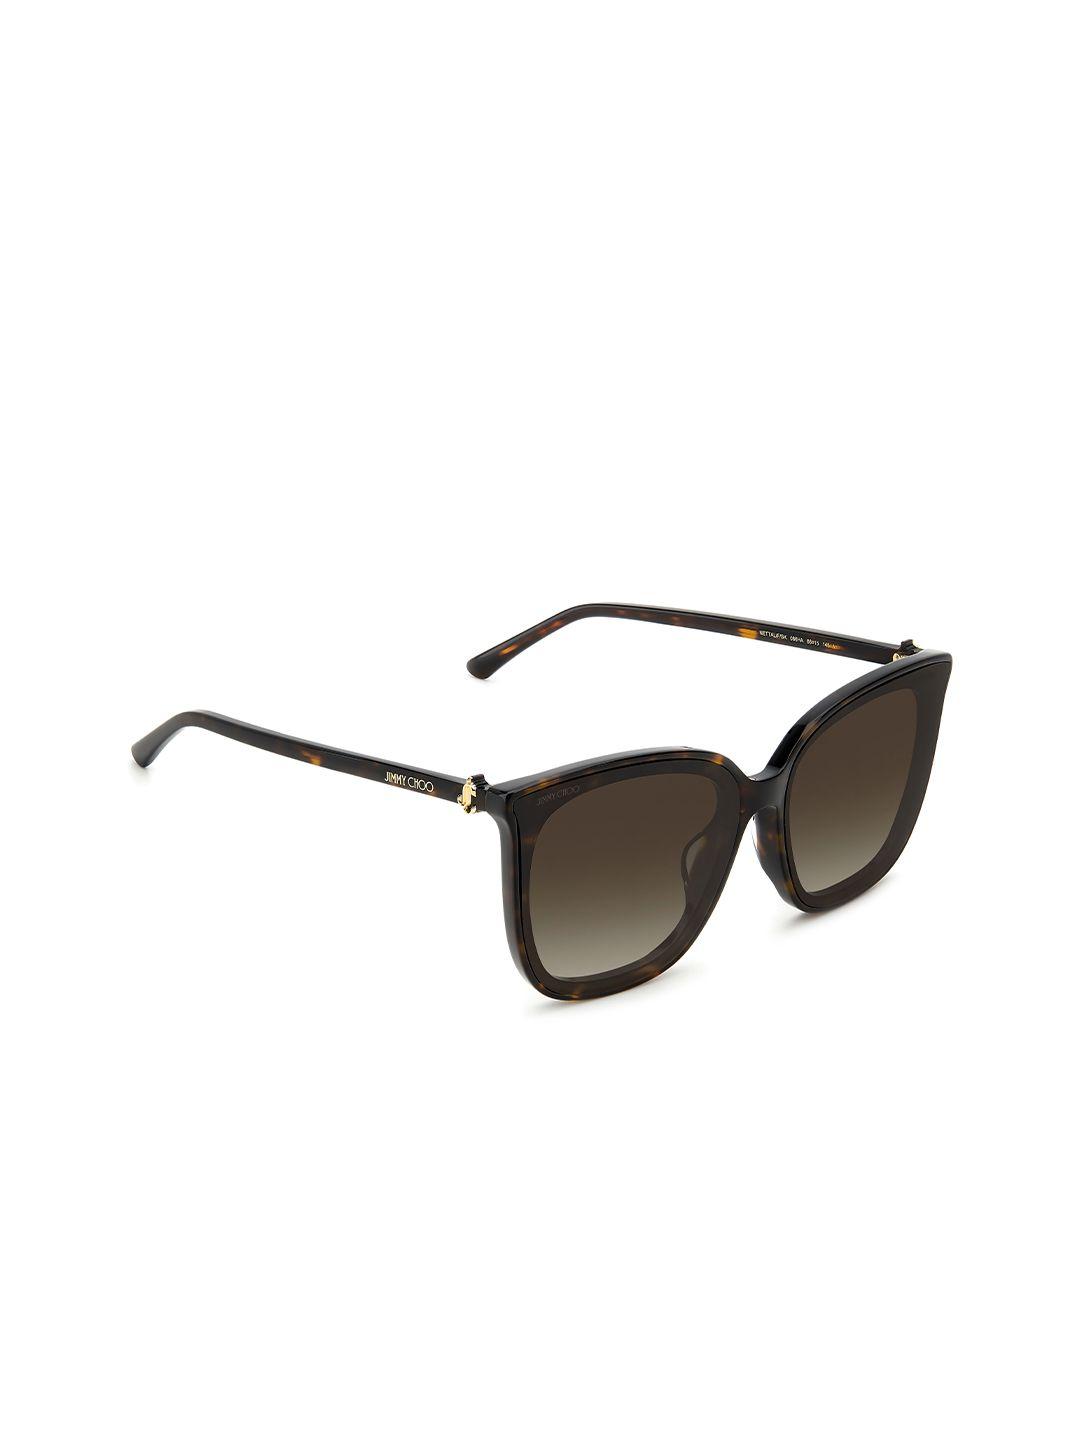 jimmy-choo-women-square-sunglasses-with-uv-protected-lens-20527808666ha